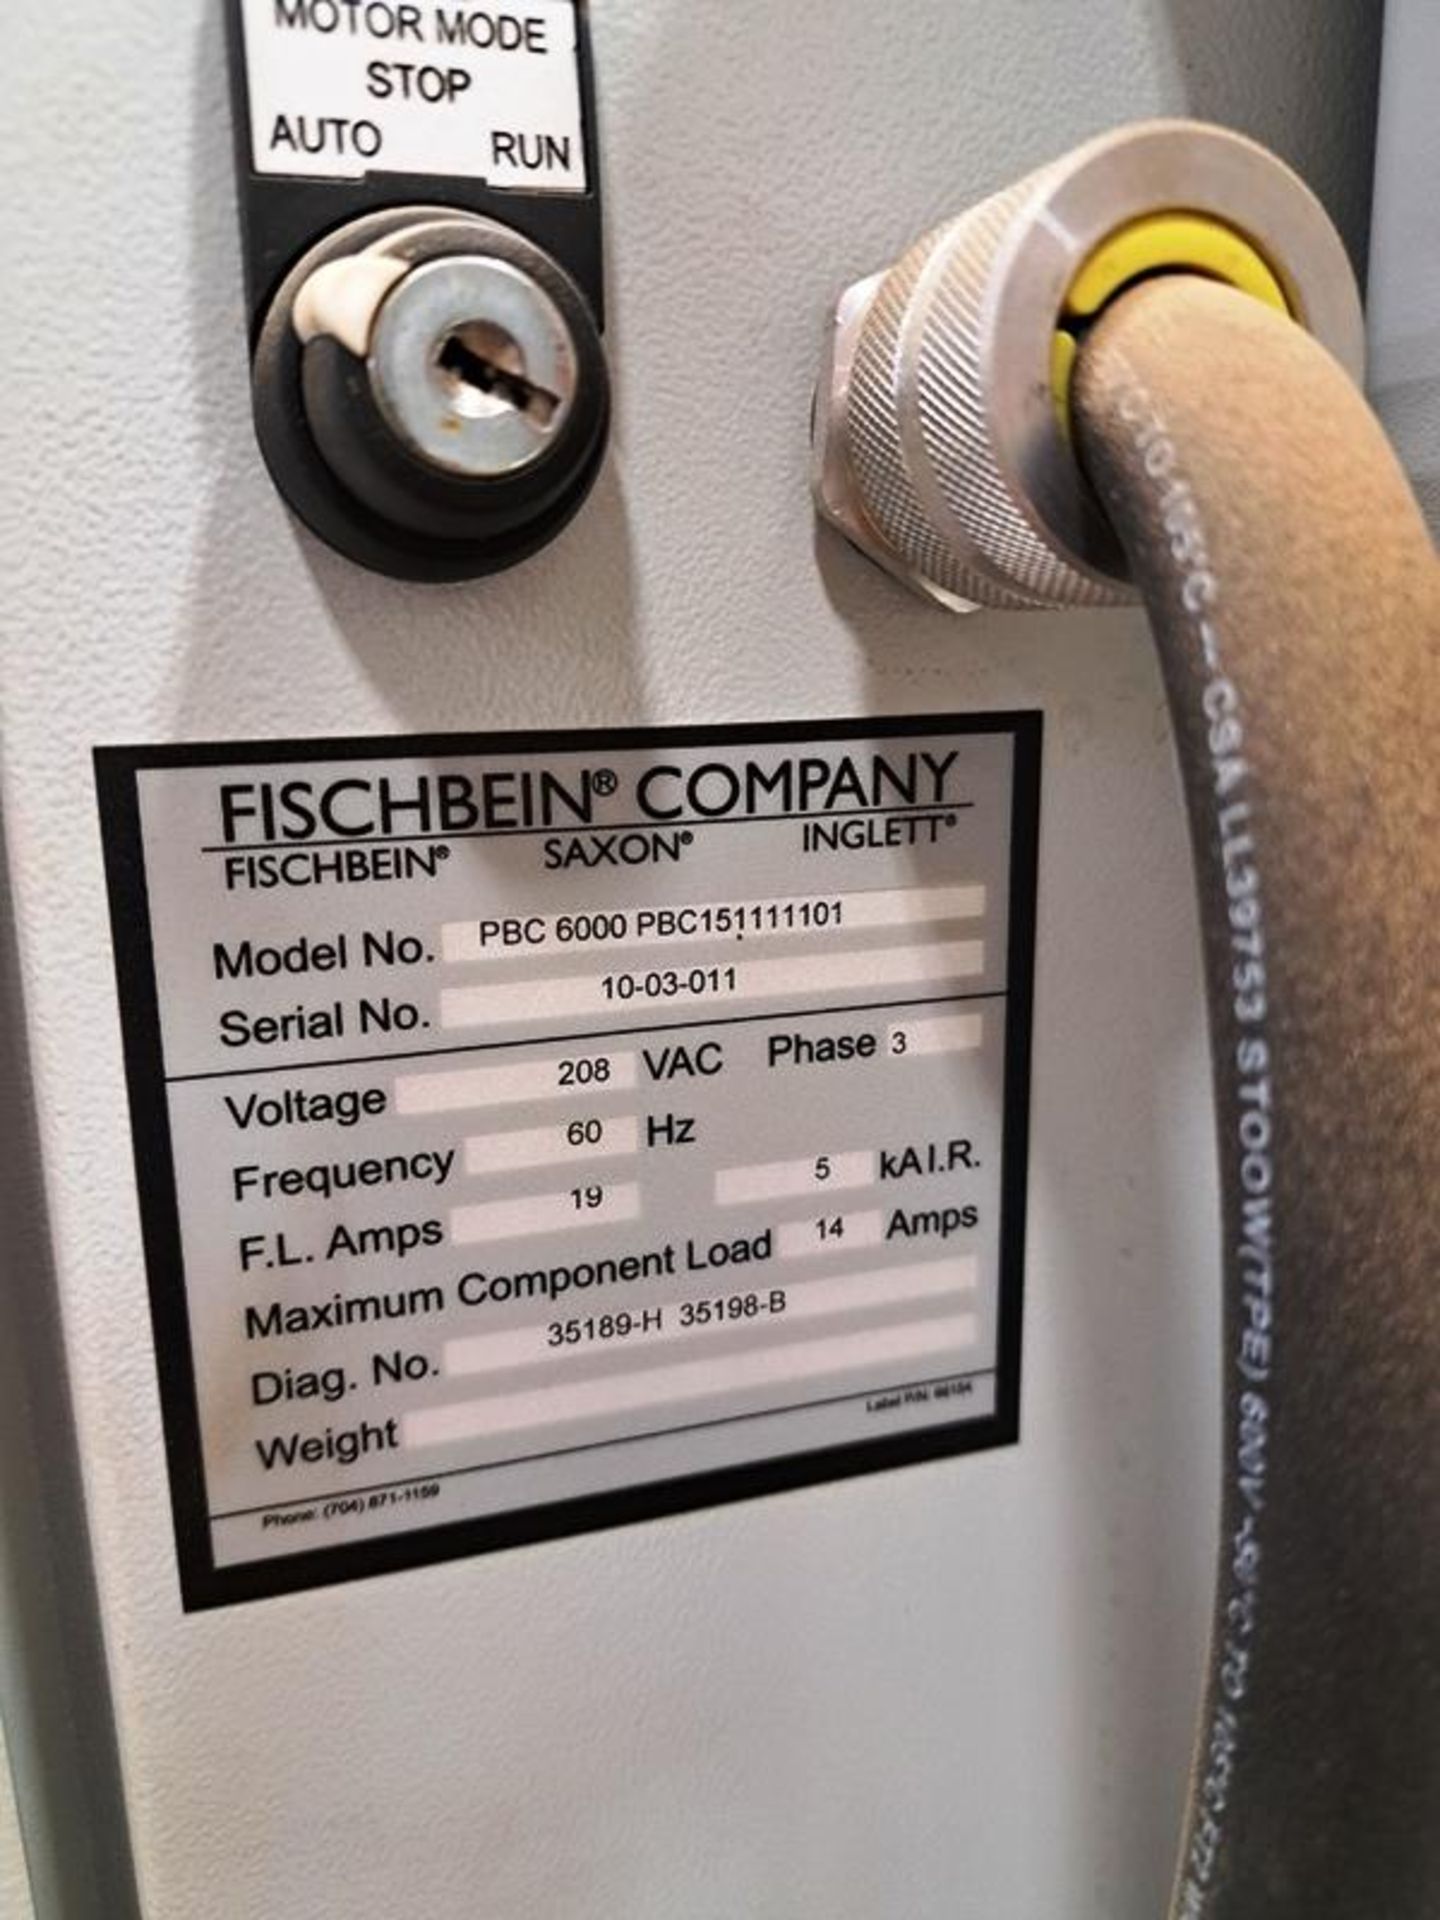 Fischbein Mdl. PBC6000 Continuous Band Sealer, manual controls, digital PBC151111101 readout, 12" - Image 9 of 9